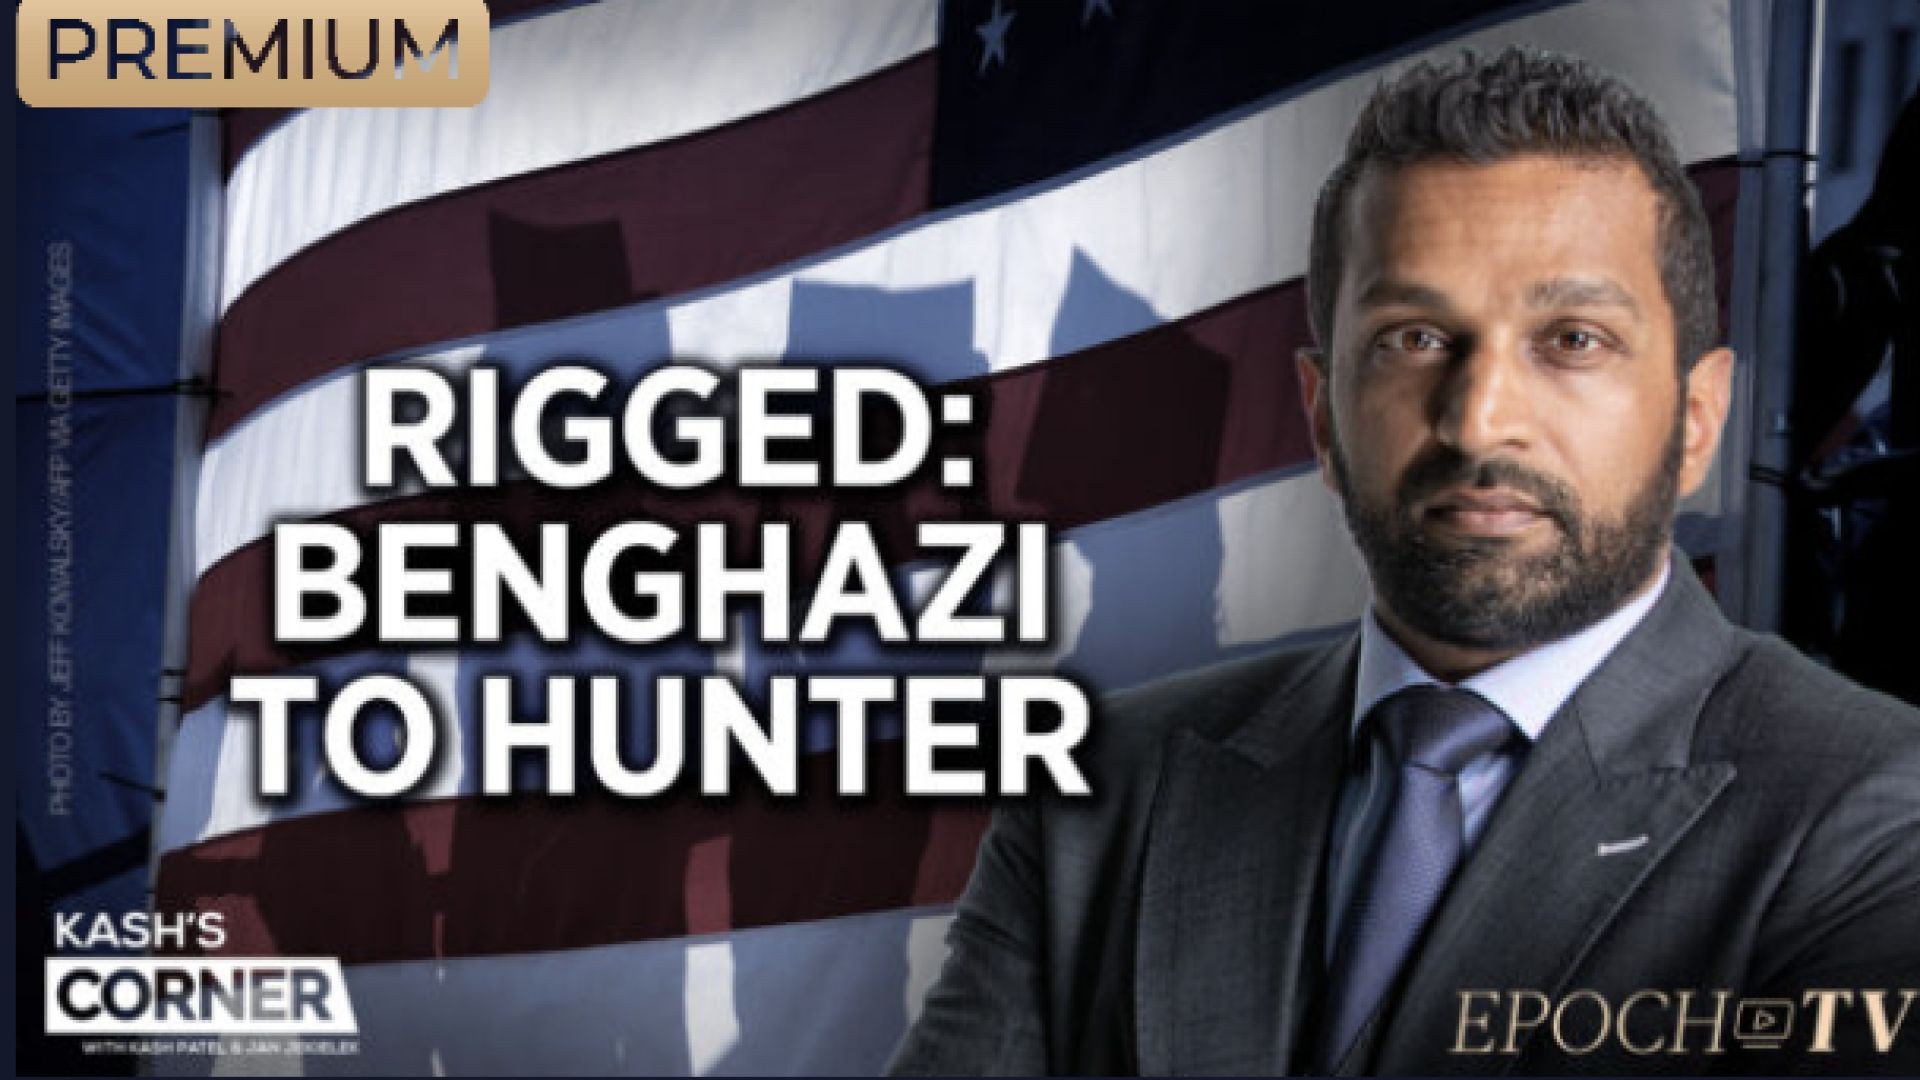 Ex-CIA Boss ‘Rigged’ 3 Election Cycles, From Benghazi to Russia Collusion to Biden Laptop